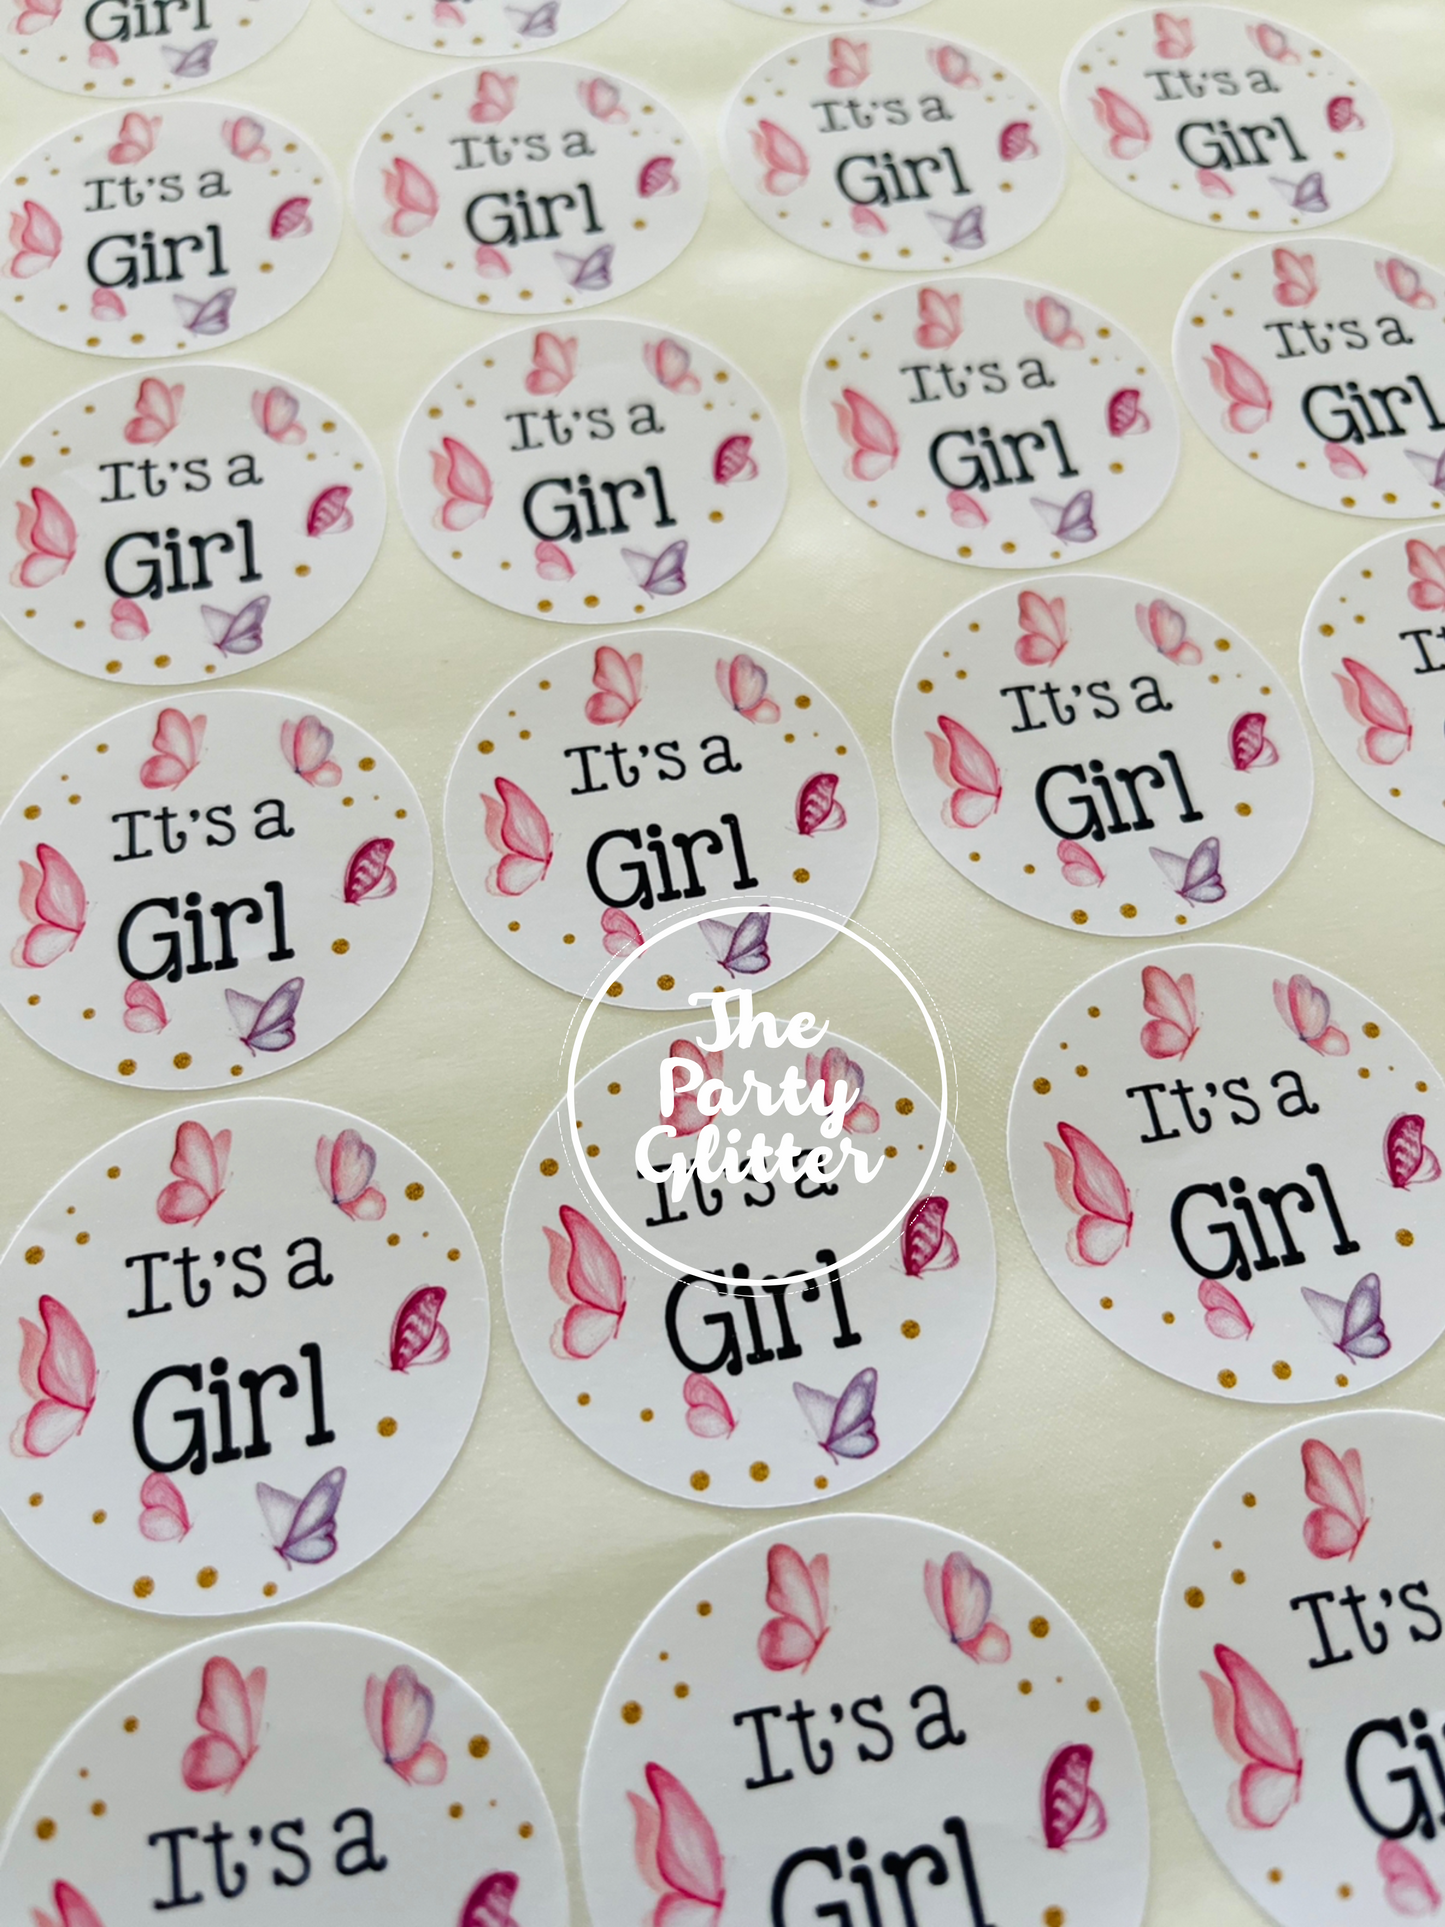 It's a girl stickers